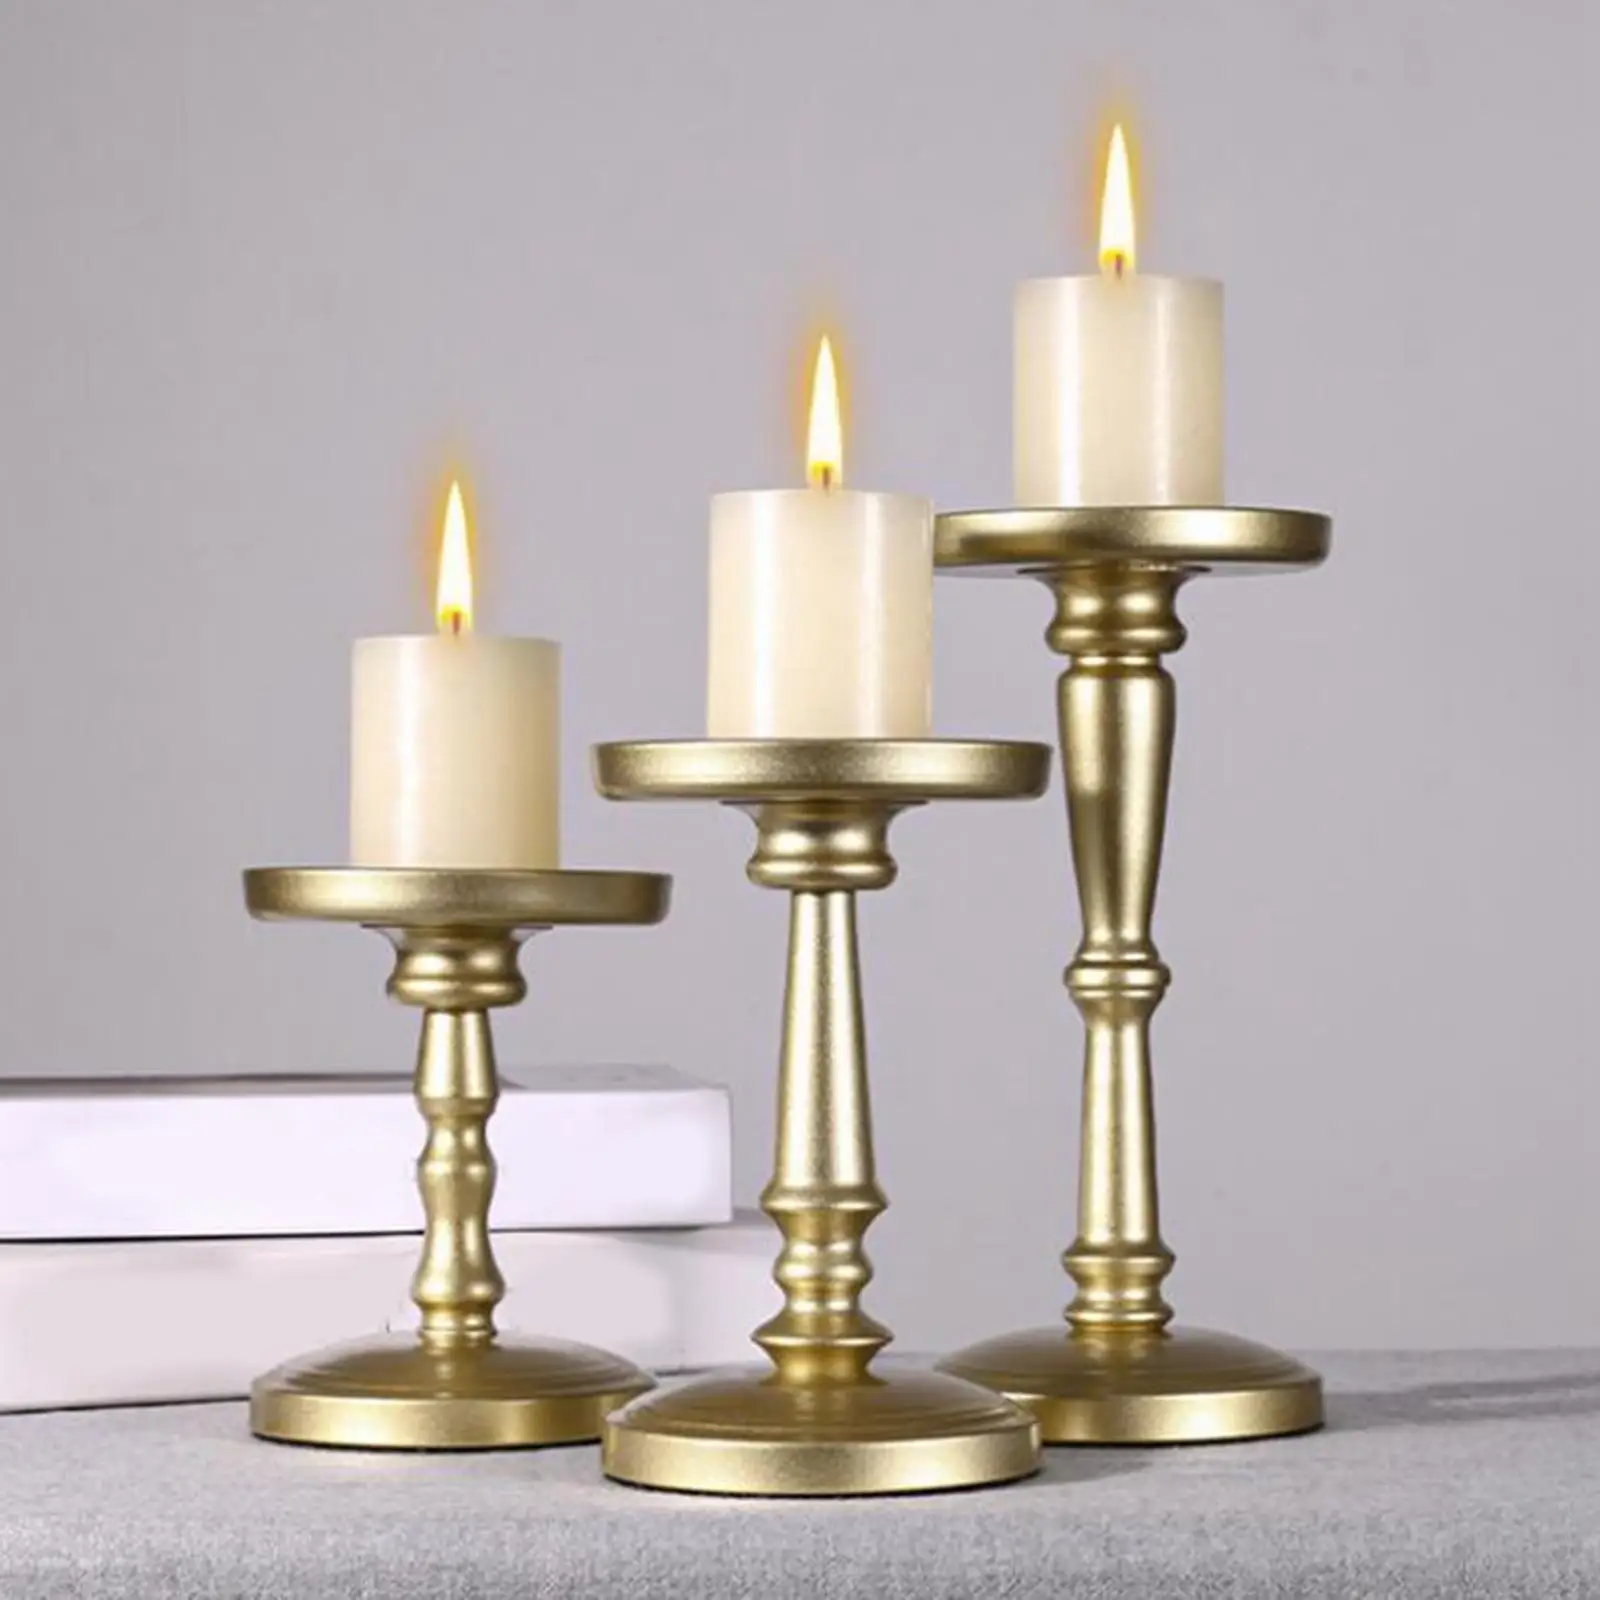 3x Metal Pillar Candle Holders Candle Stands Ornaments Candelabra for Centerpieces living room Farmhouse Decor